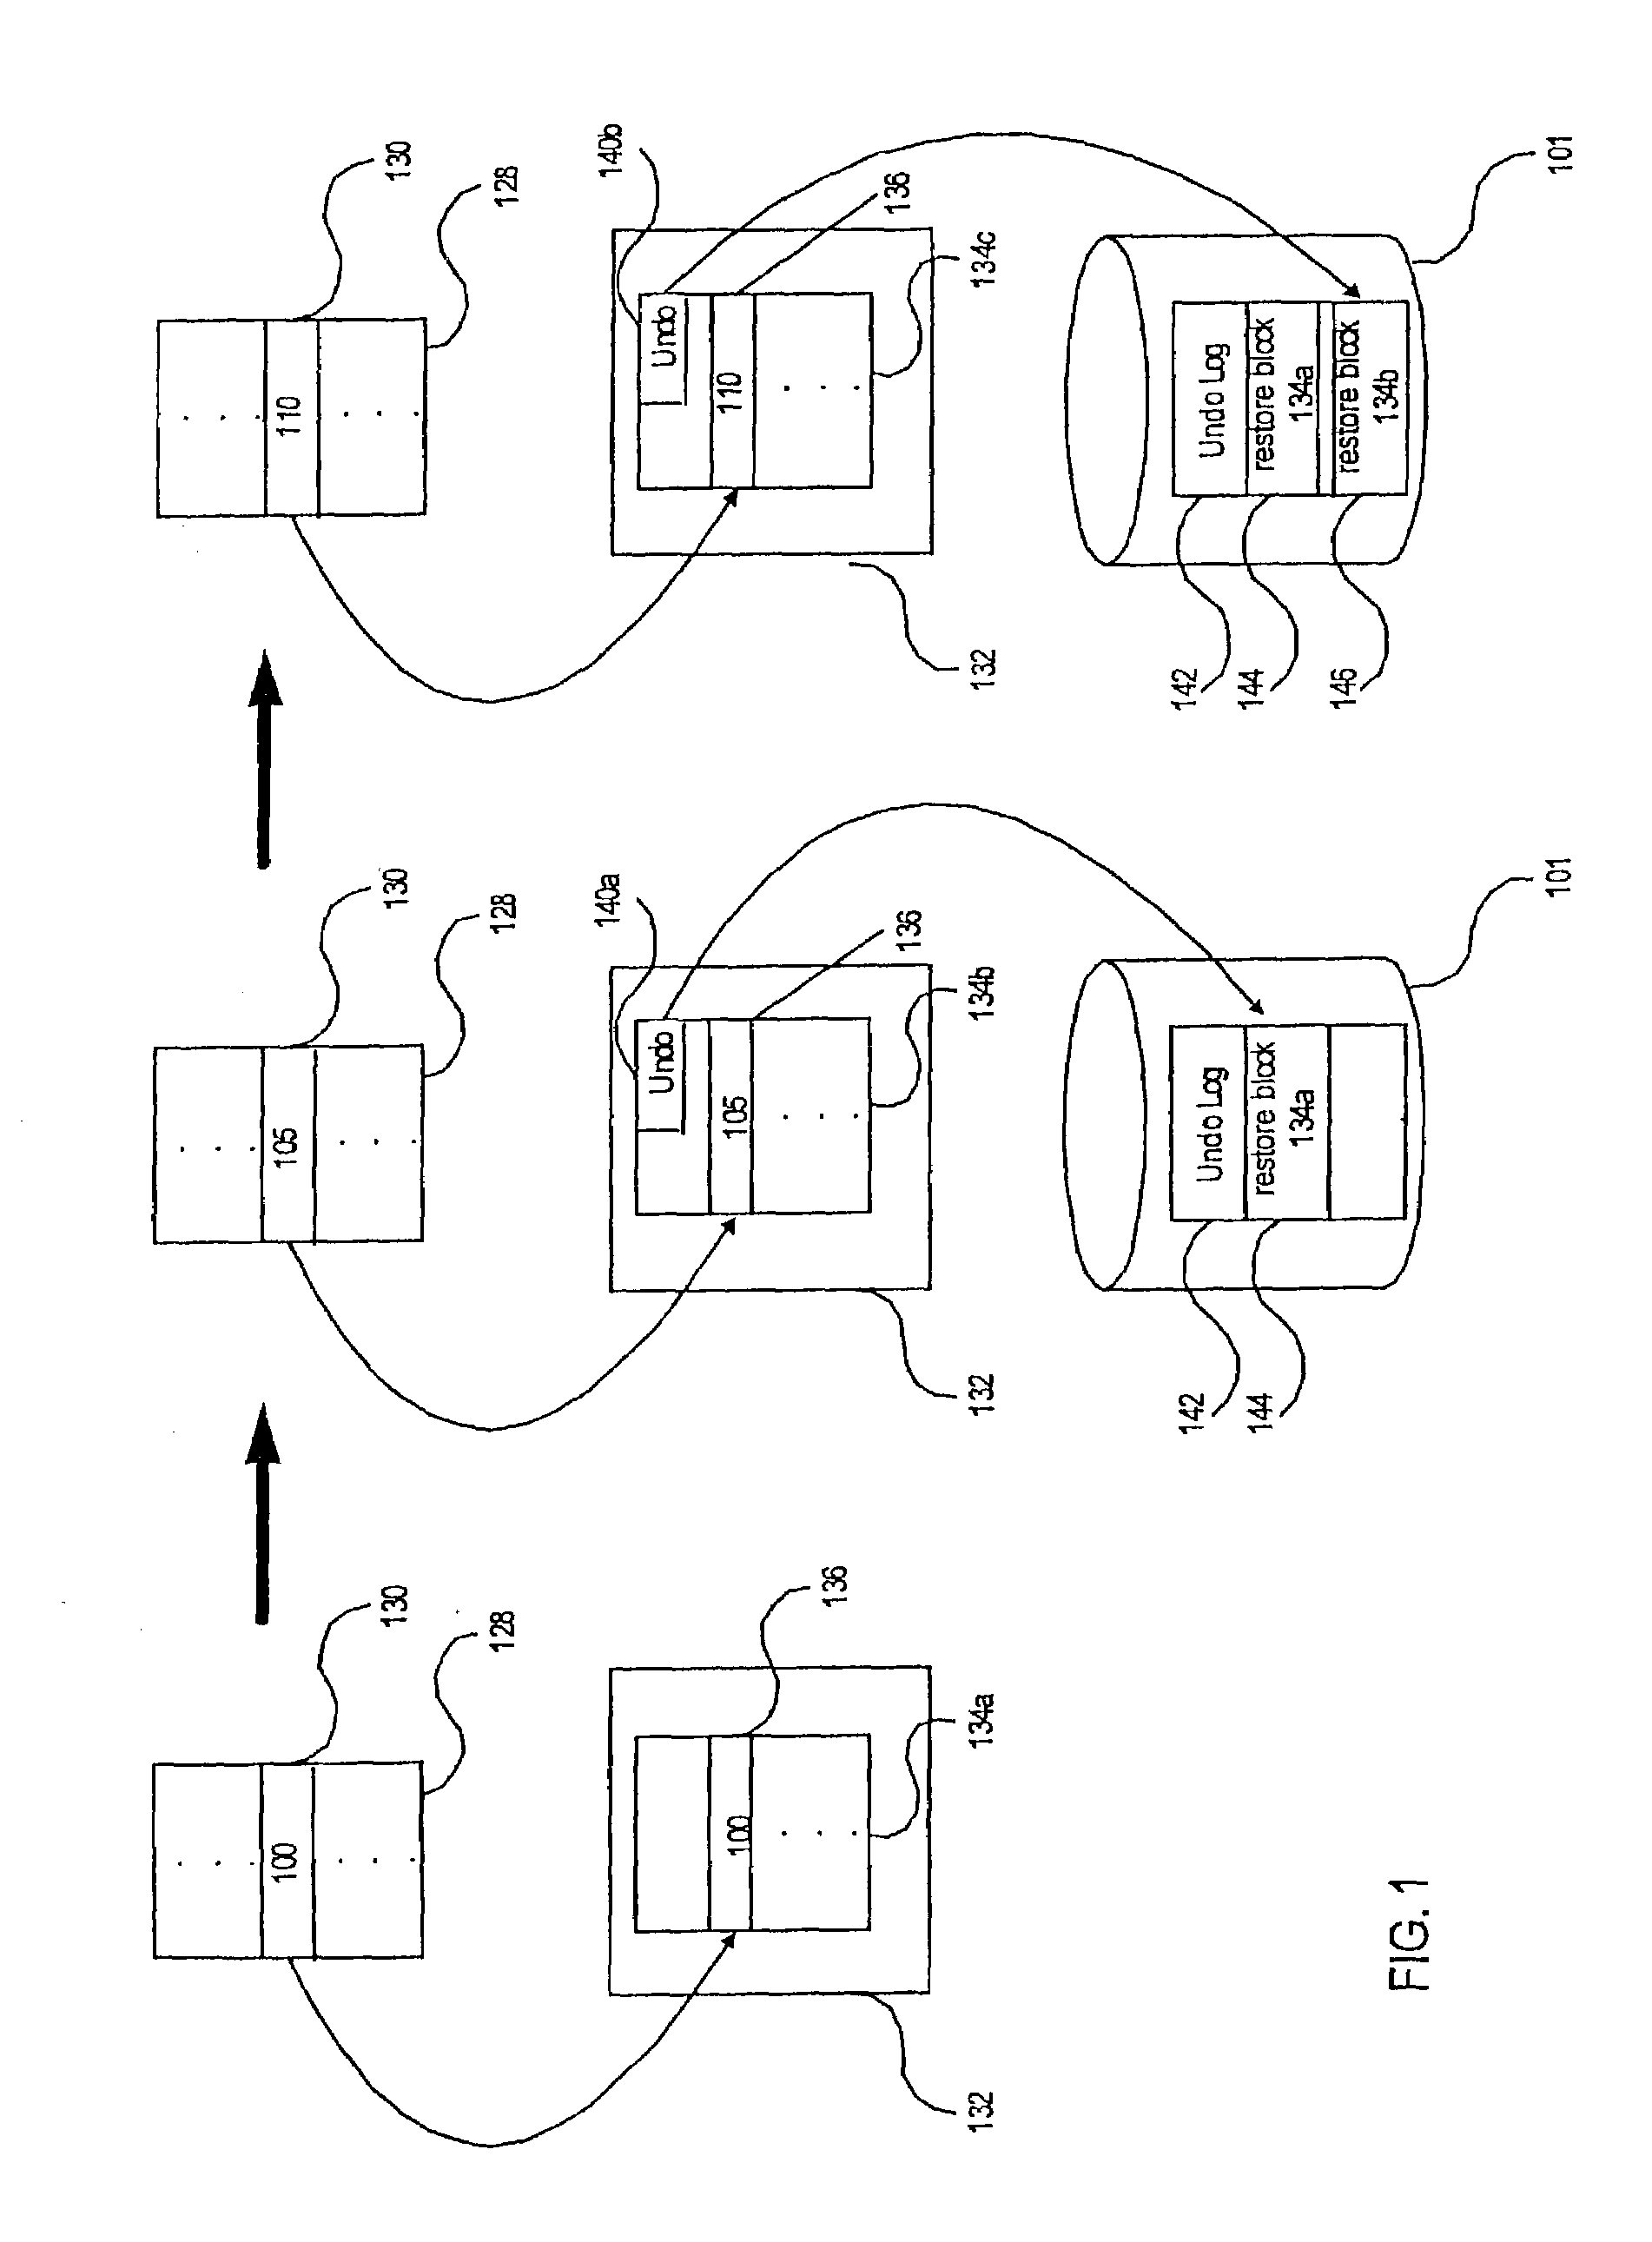 Method and mechanism for implementing in-memory transaction logging records